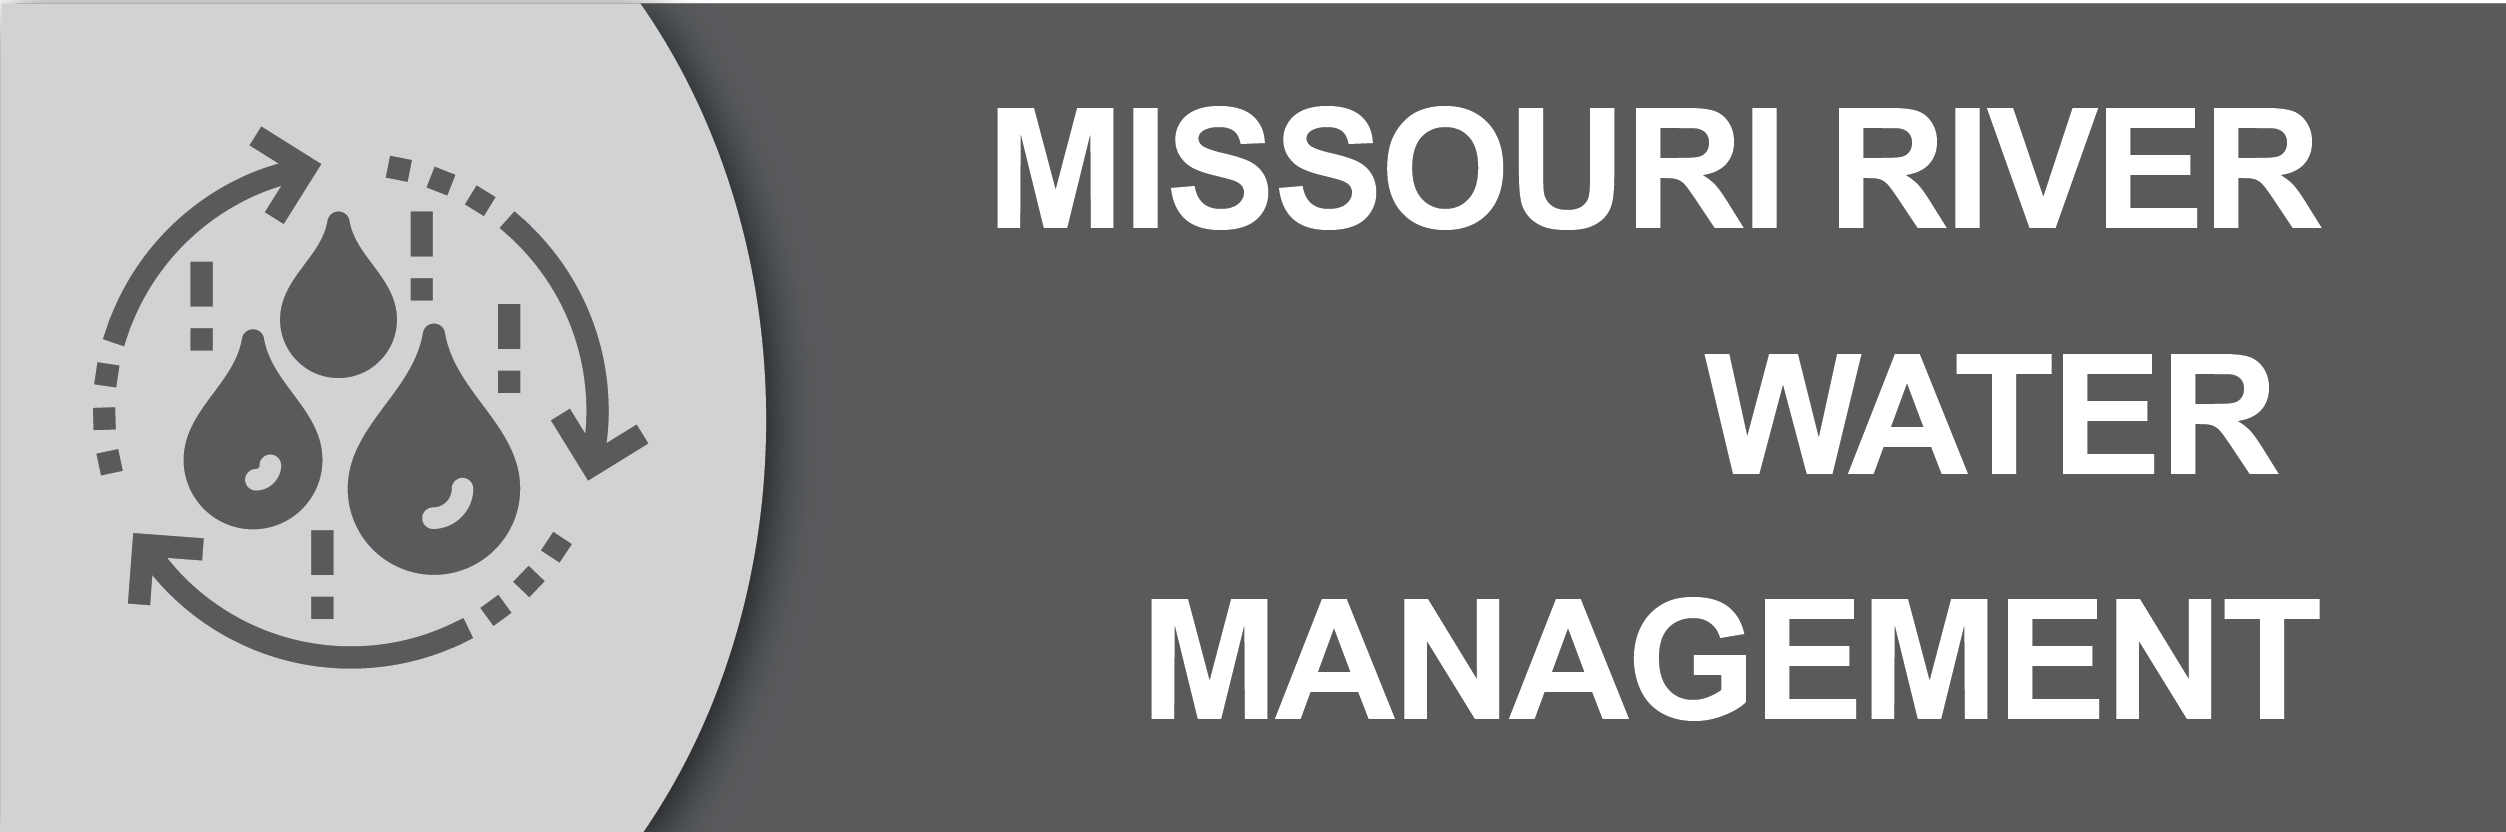 Icon with words "Missouri River Water Management"